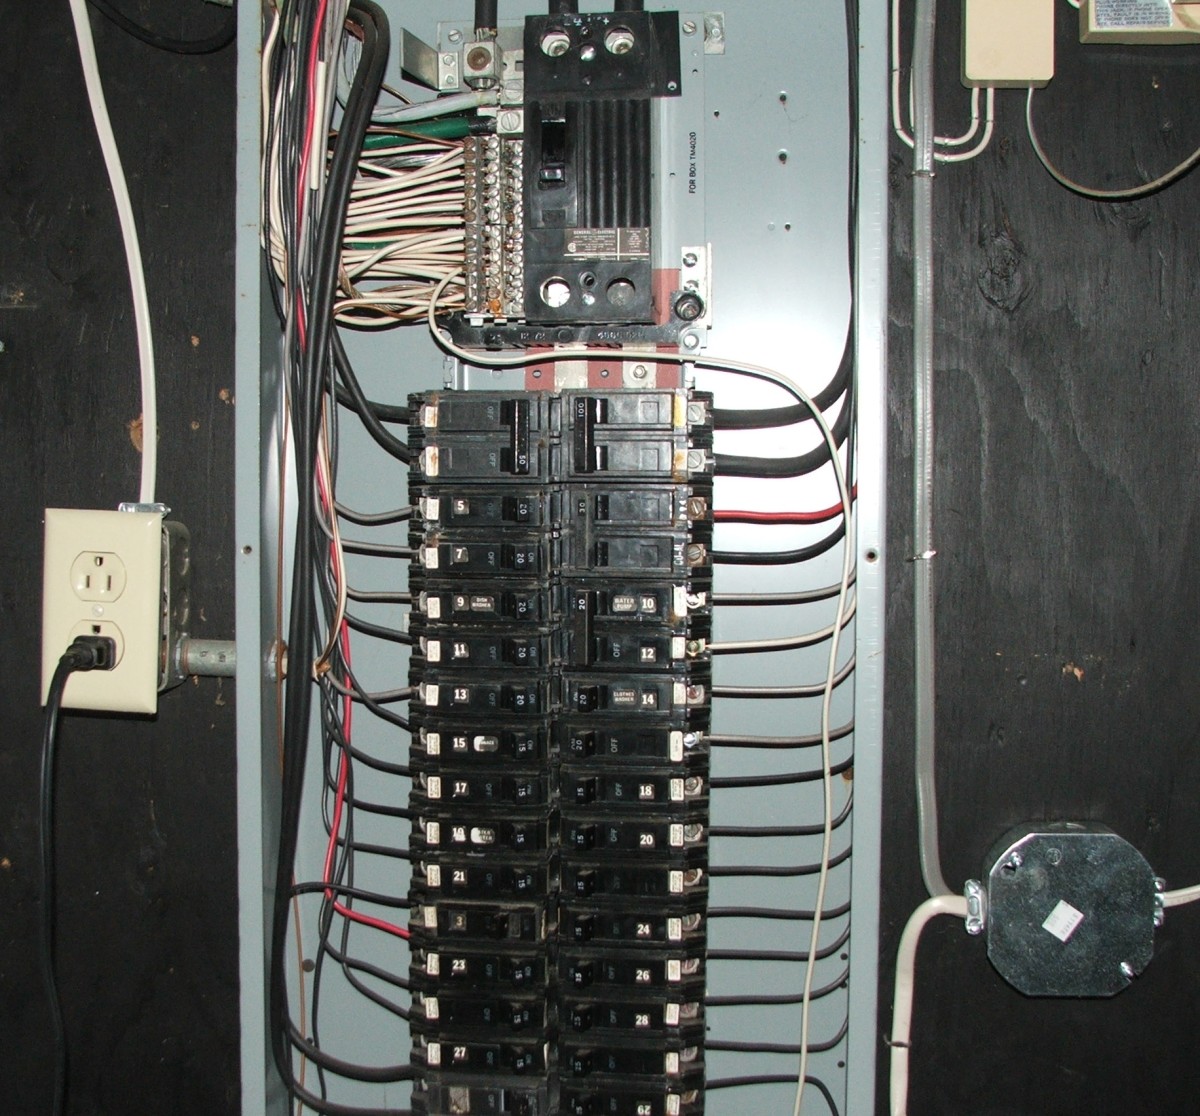 Always use a circuit breaker that exactly matches the service panel.